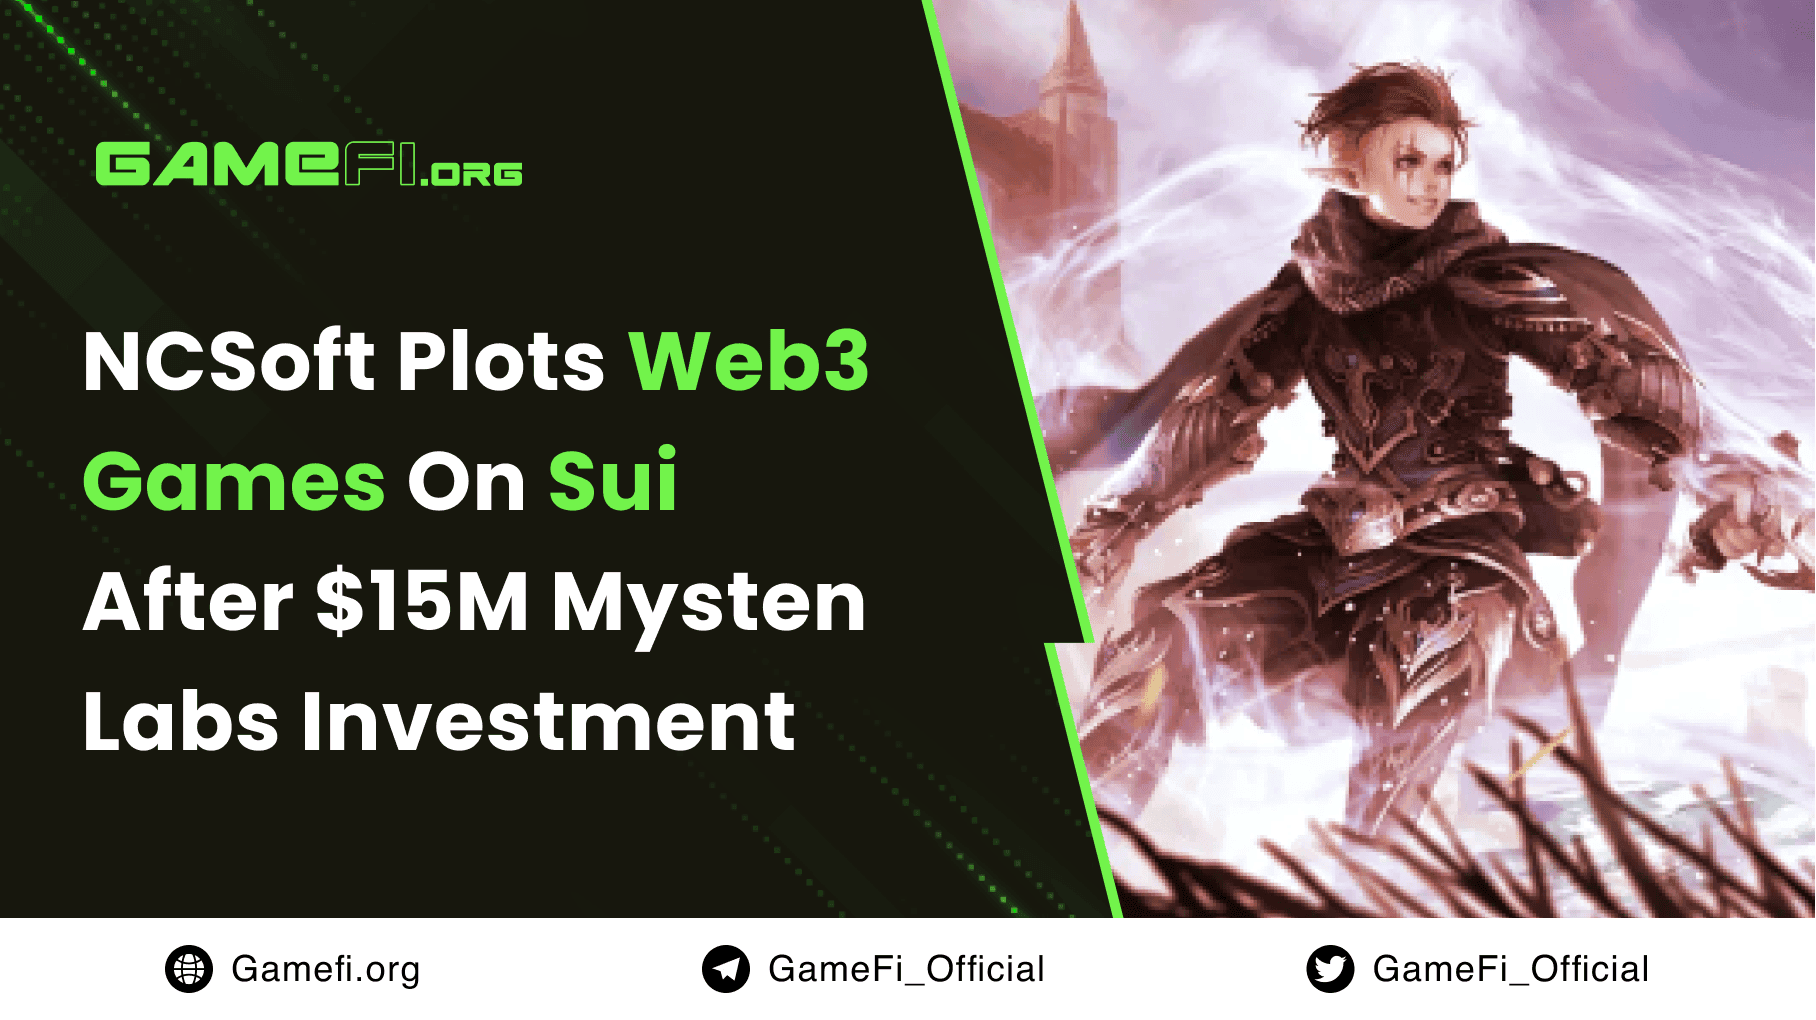 NCSoft Plots Web3 Games On Sui After $15M Mysten Labs Investment